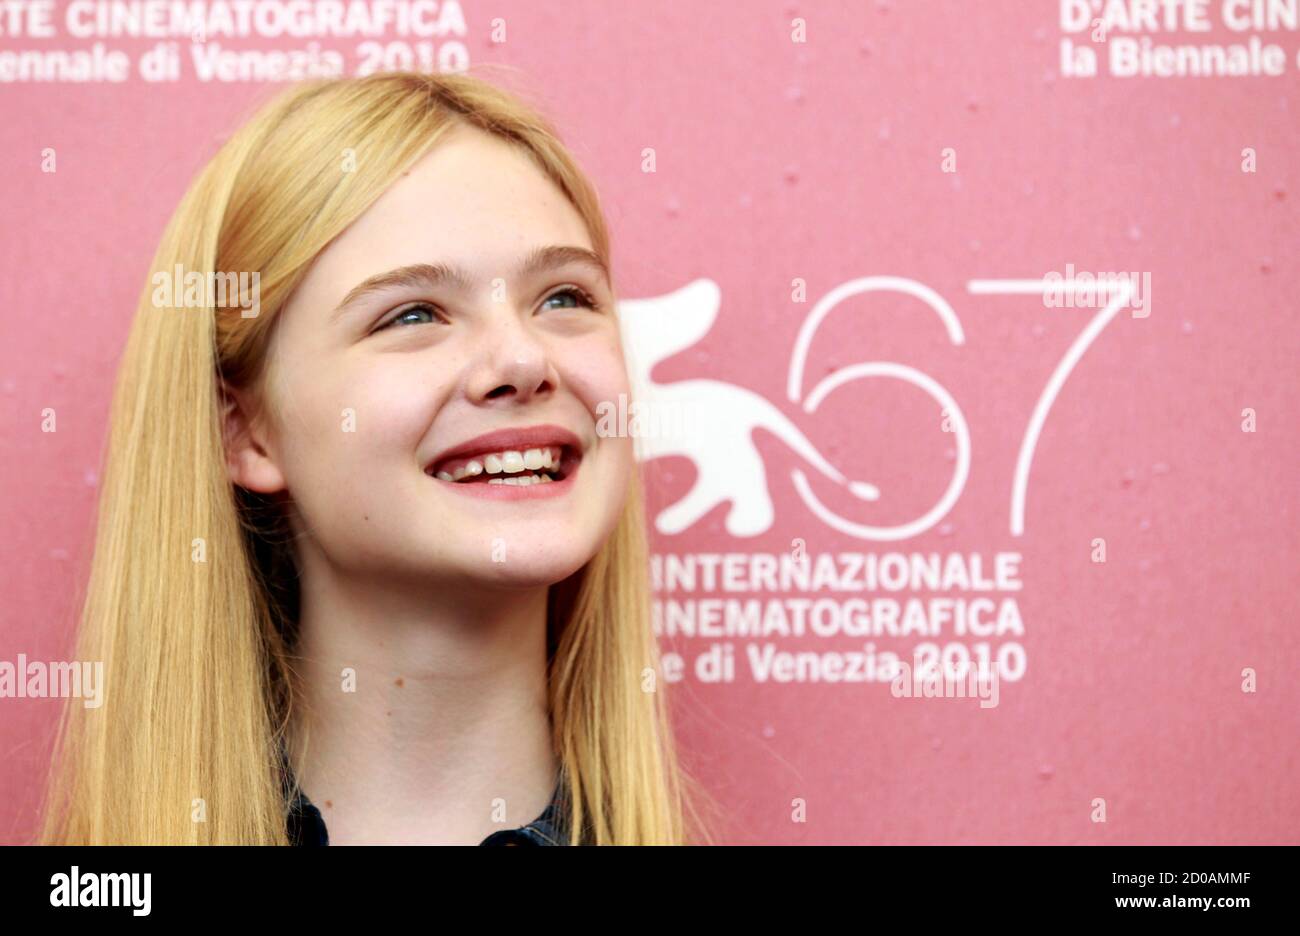 Actress Elle Fanning smiles as she poses during a photocall of in-competition film 'Somewhere' by Sofia Coppola at the 67th Venice Film Festival September 3, 2010.  REUTERS/Alessandro Bianchi   (ITALY - Tags: ENTERTAINMENT HEADSHOT) Stock Photo